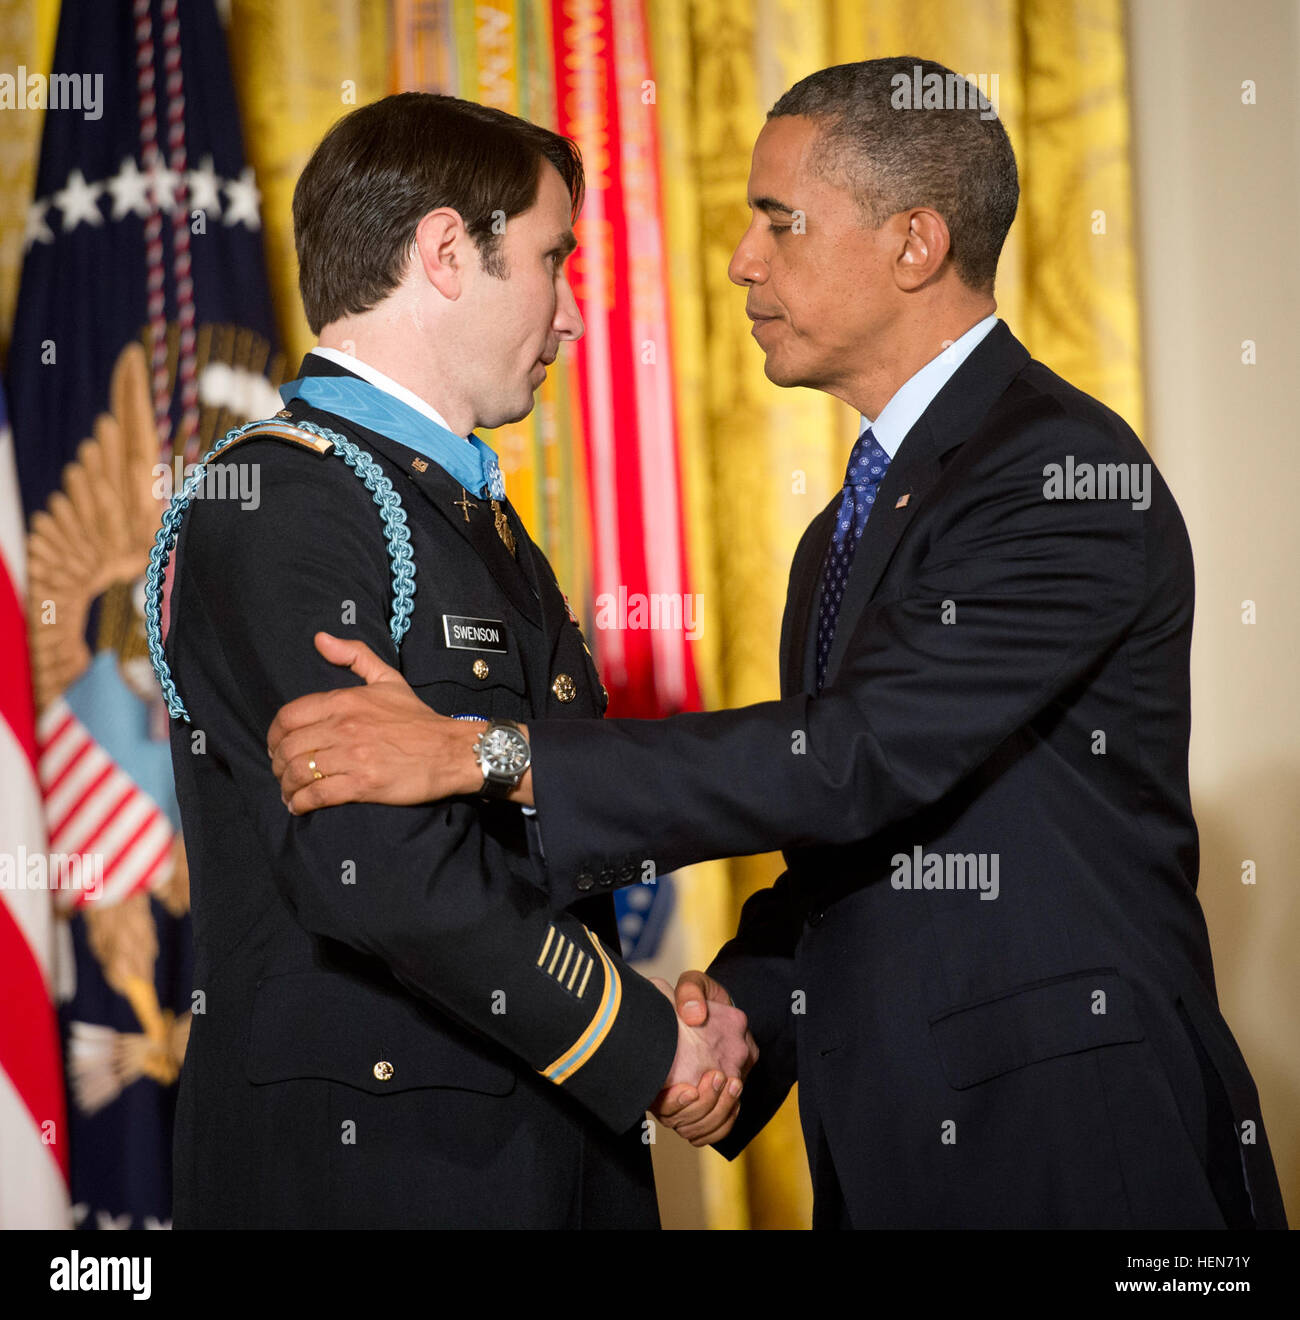 President Barack Obama congratulates former Capt. William D. Swenson just after he presented him with the Medal of Honor in the East Room of the White House, Oct. 15, 2013.  In six hours of continuous fighting against more than 60 well-armed, well-positioned enemy fighters, Swenson braved intense enemy fire and willfully put his life in danger against the enemy's main effort, multiple times in service of his fallen and wounded comrades while serving as an Afghan Border Police adviser, in support of 1st Battalion, 32nd Infantry Regiment, 3rd Brigade Combat Team, 10th Mountain Division (Light In Stock Photo